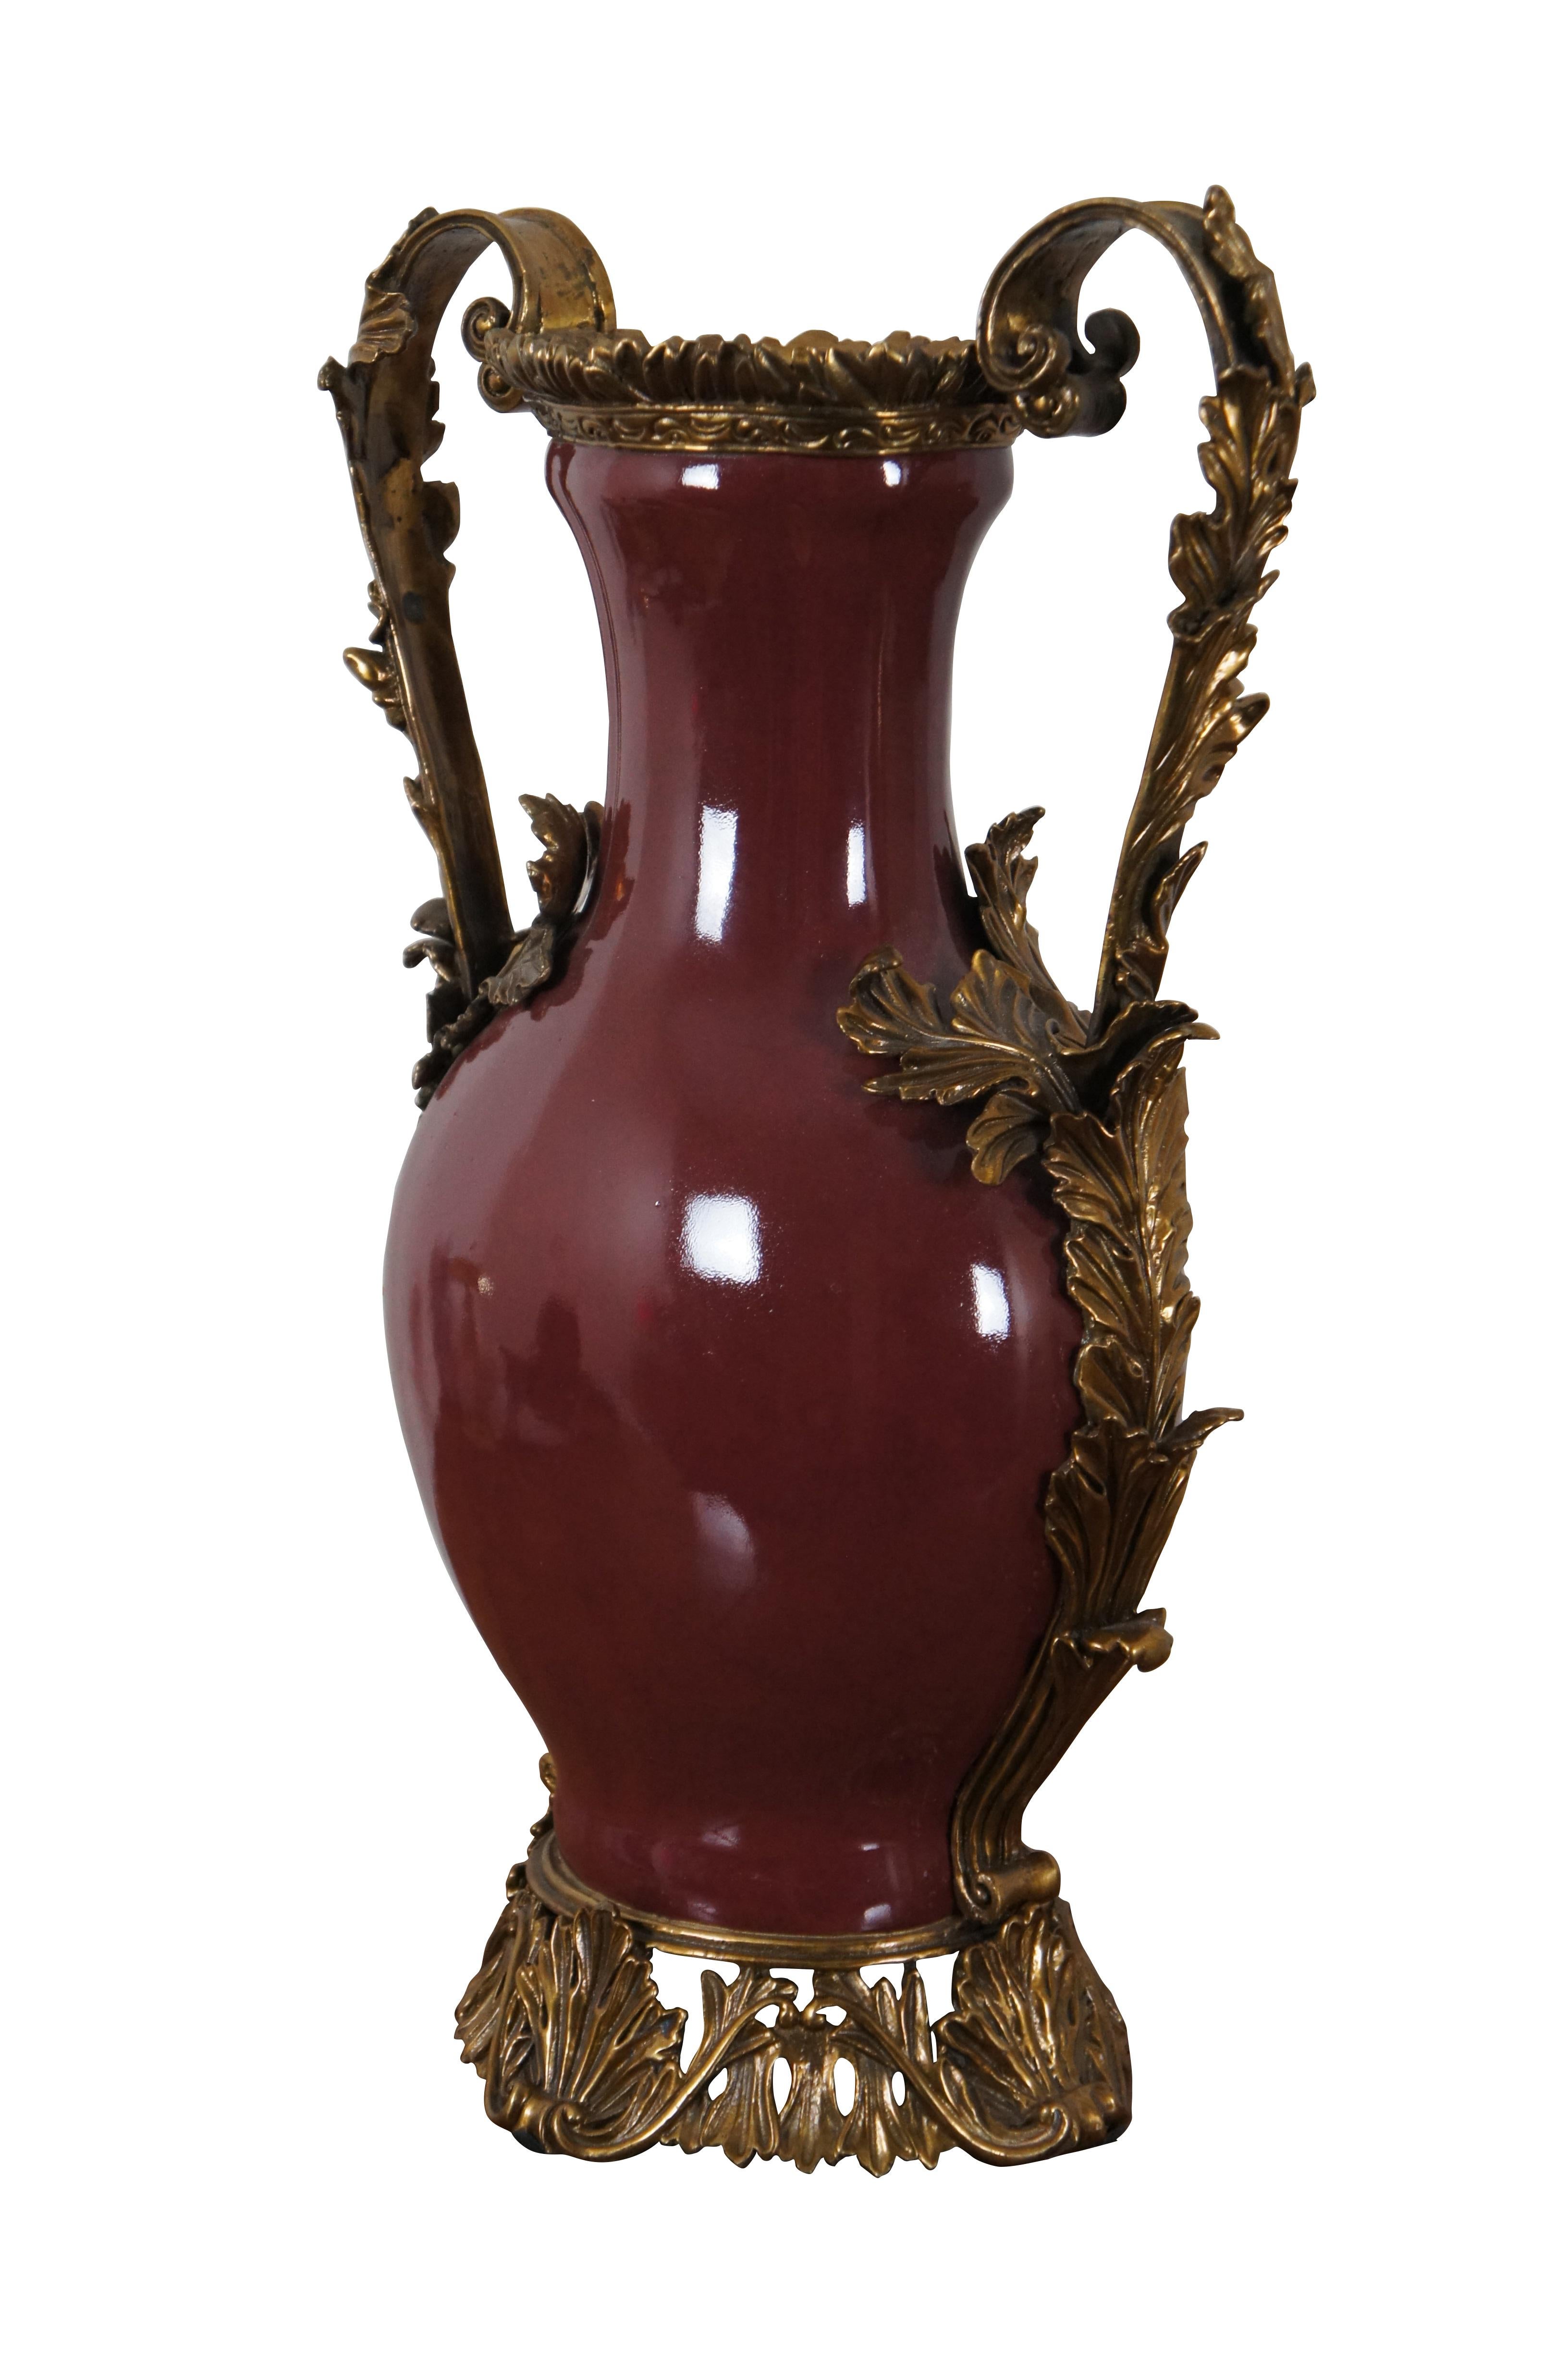 Late 20th century oxblood red porcelain vase with gilt bronze base, rim, and double handles in the manner of French inspired vase.  Features swirling foliate ormolu with acanthus leaves and scalloped accents. Made in China. Not for Food Use, for